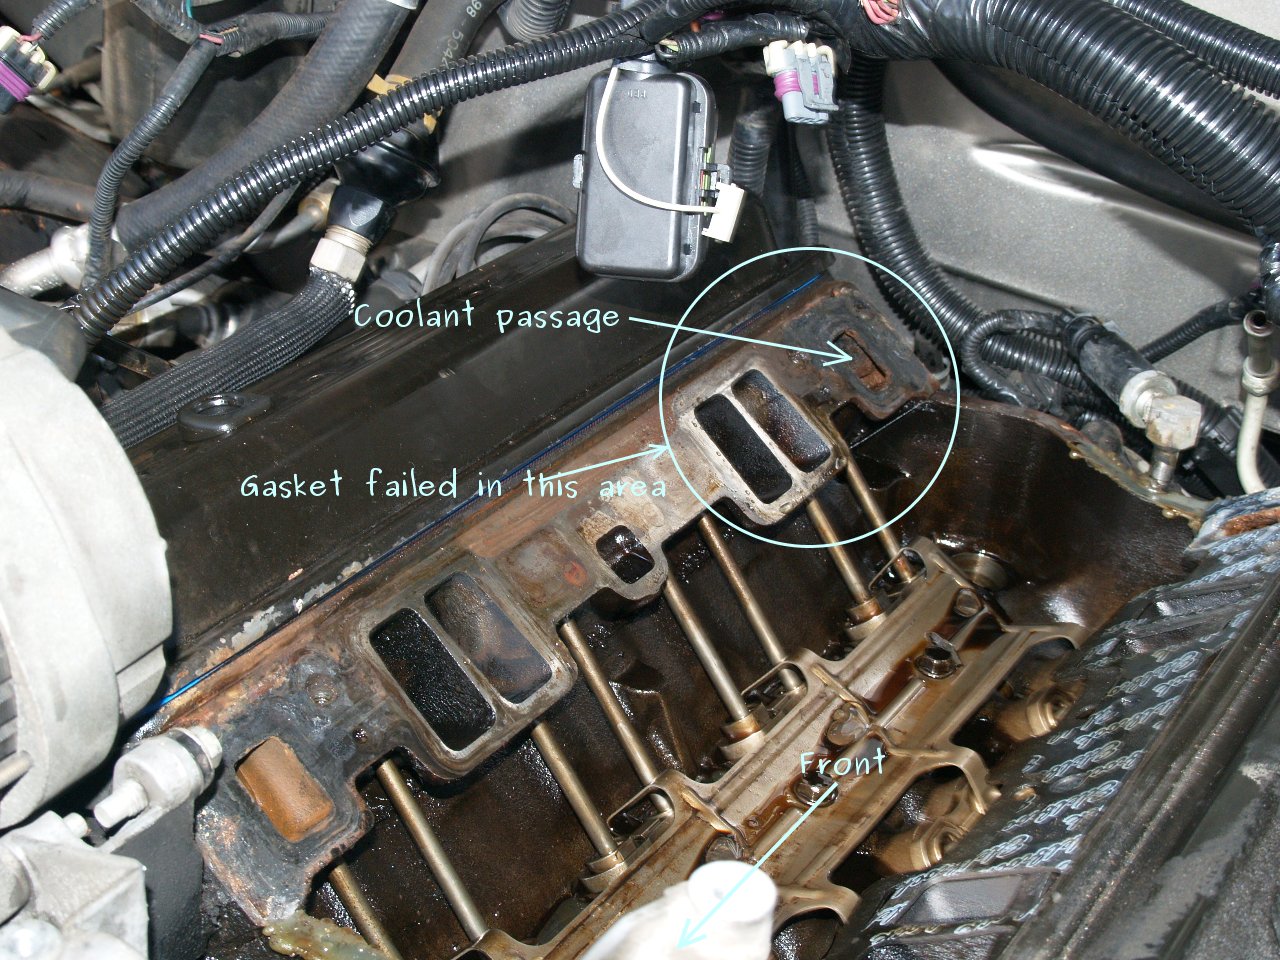 See B222C in engine